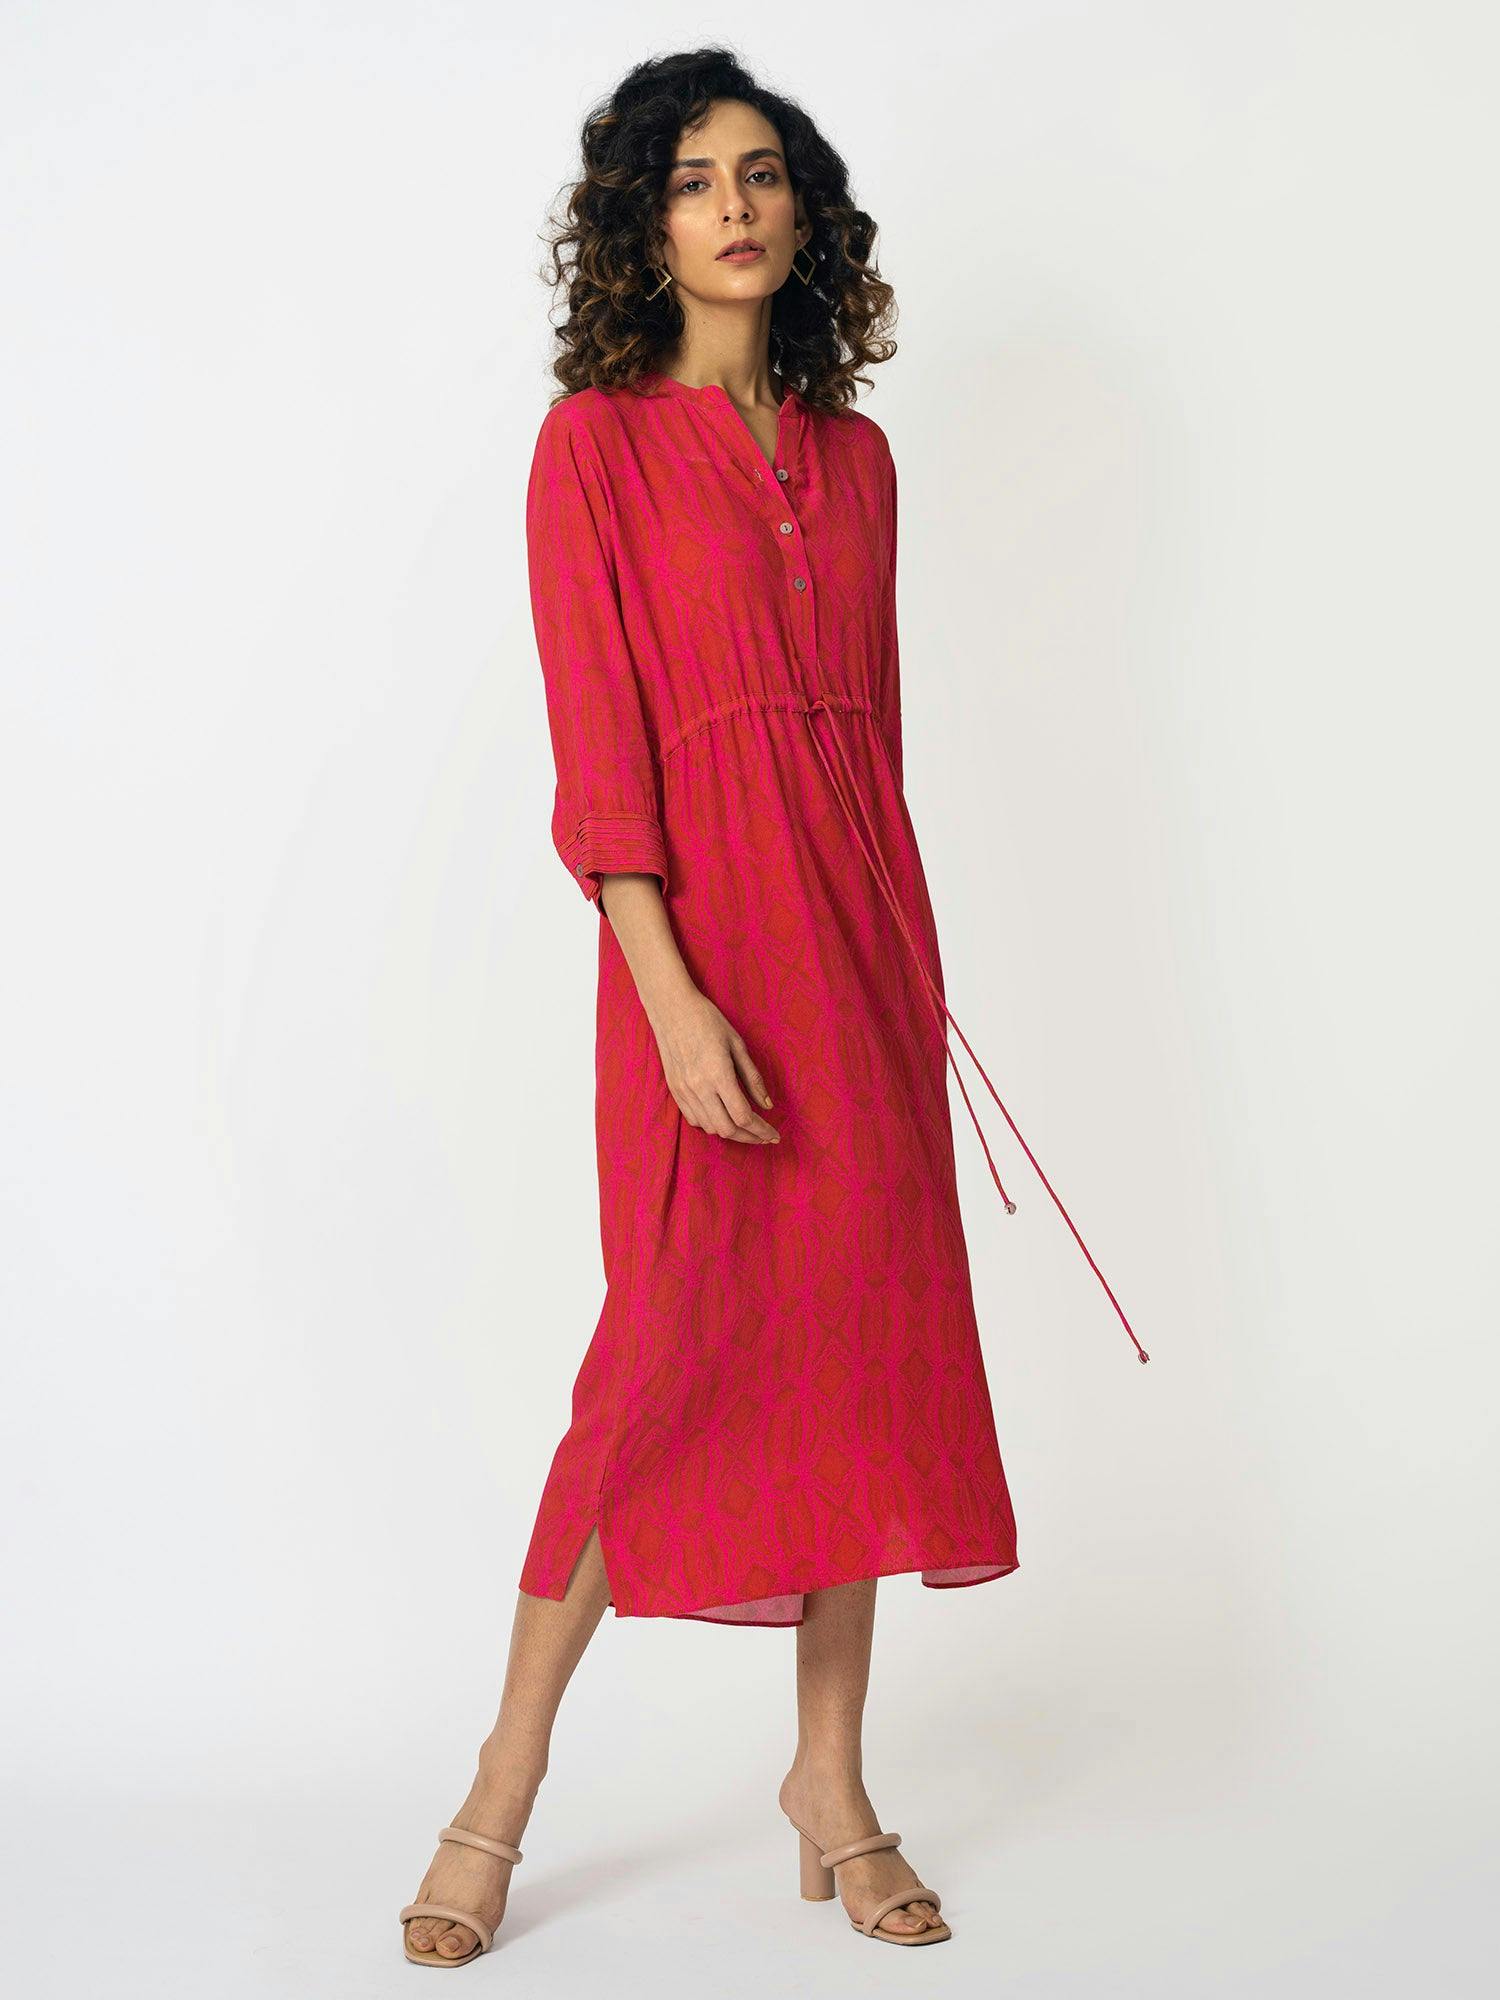 Rhombus Red Drawstring Dress, a product by KLAD